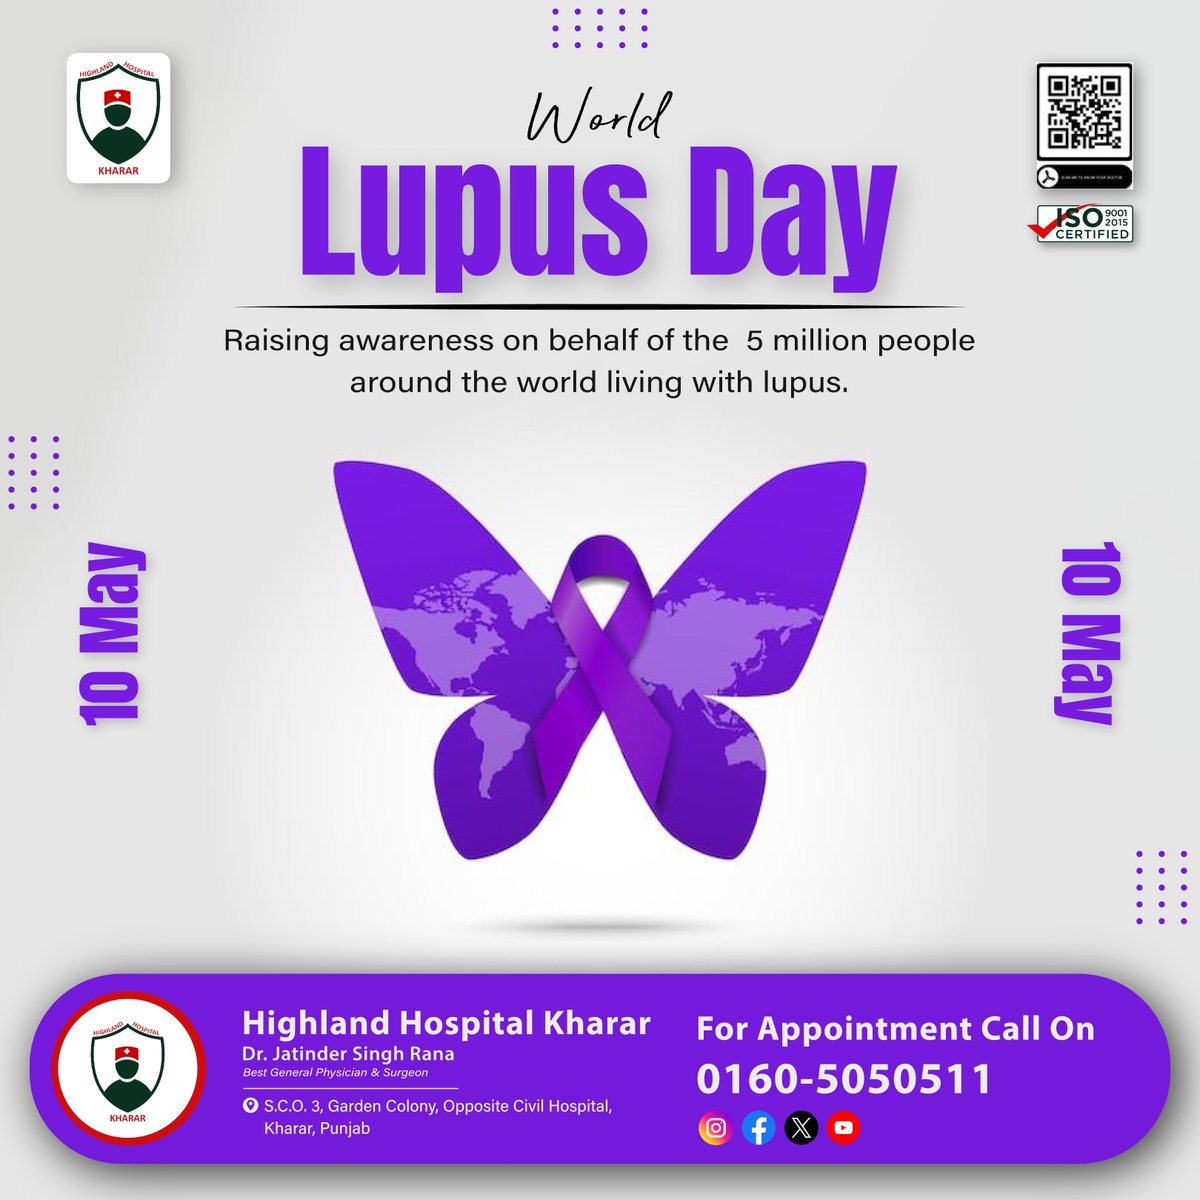 Today, on #WorldLupusDay, we at #HighlandHospitalKharar stand together in the fight against #Lupus. Let's raise awareness, educate, and support those living with this #disease. Together, we can make a difference.
.
#Kharar #Mohali #DrJatinderSingh #Besthospital #lupus #Healing